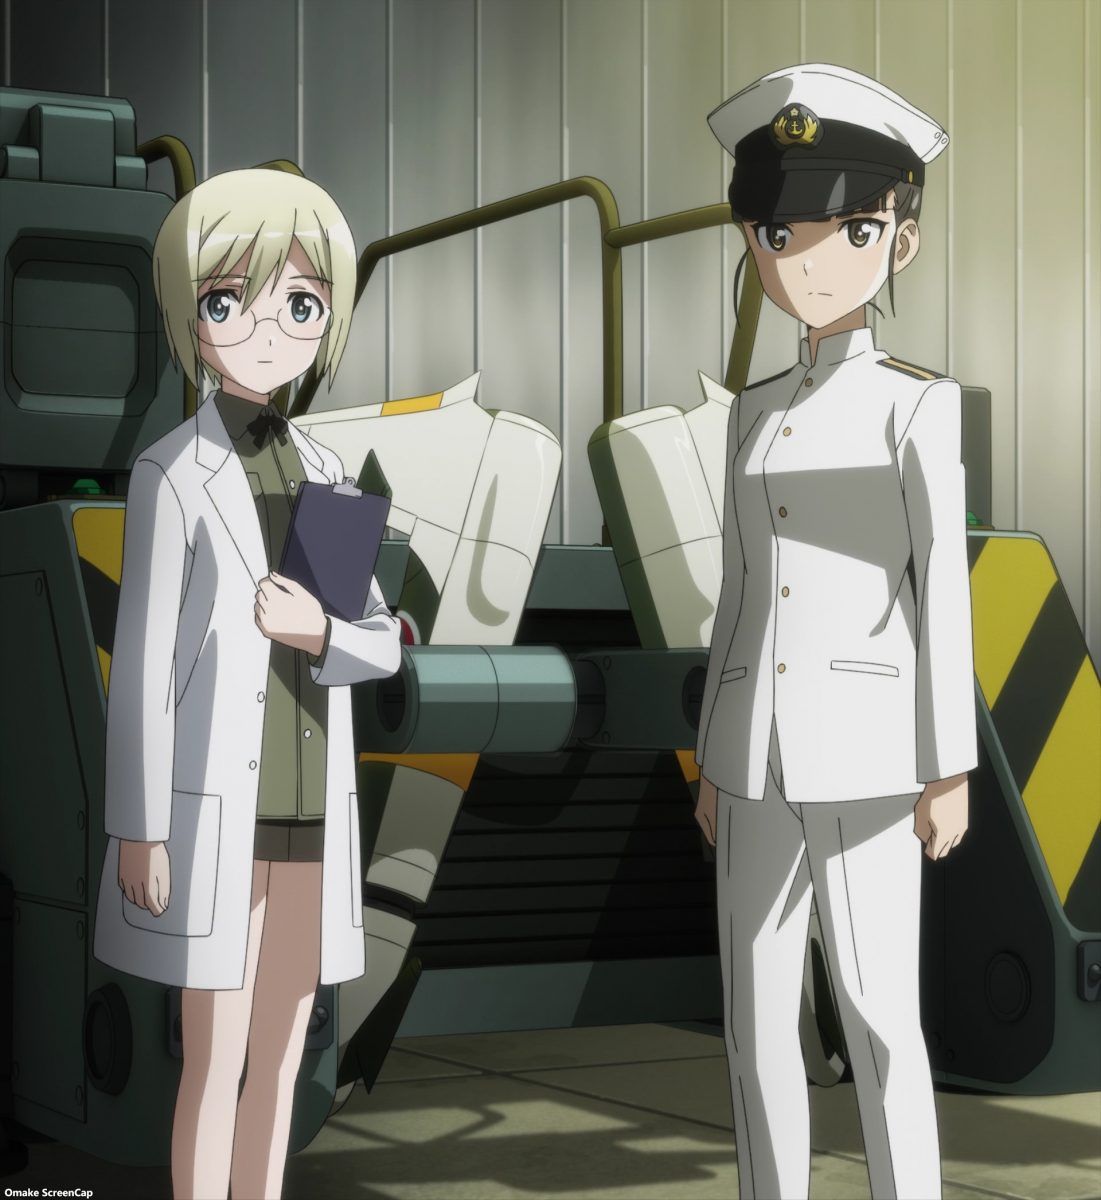 Strike Witches Road To Berlin Episode 11 Ursula And Mio With Striker Units